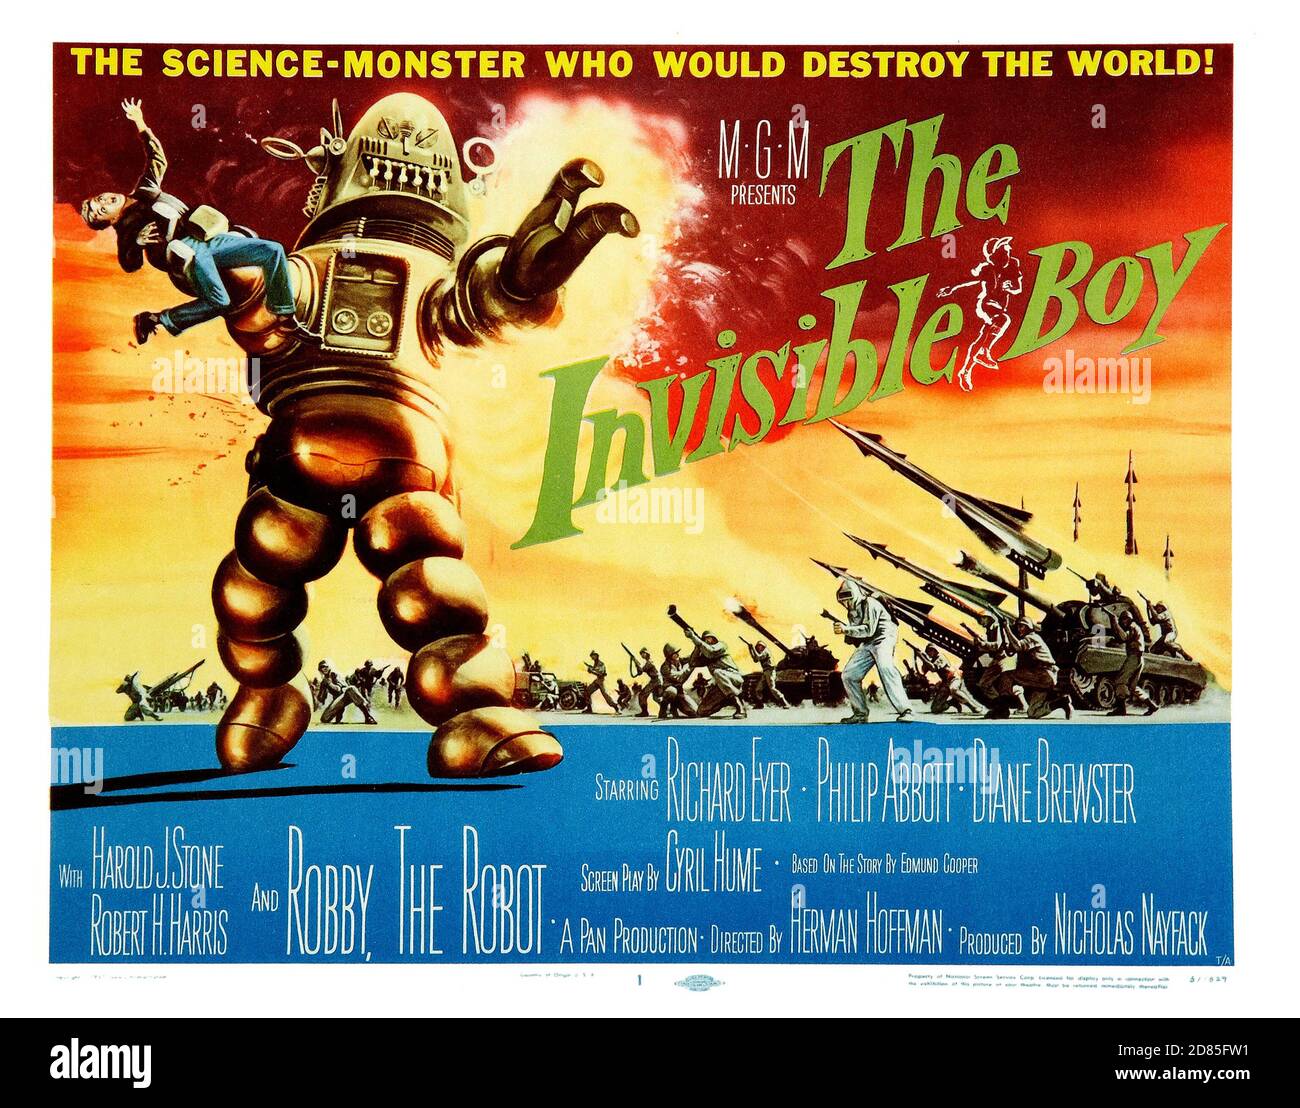 Vintage movie poster: The Invisible Boy (aka S.O.S Spaceship) is a 1957 black and white American science fiction film. Classic 1950s film poster. Stock Photo